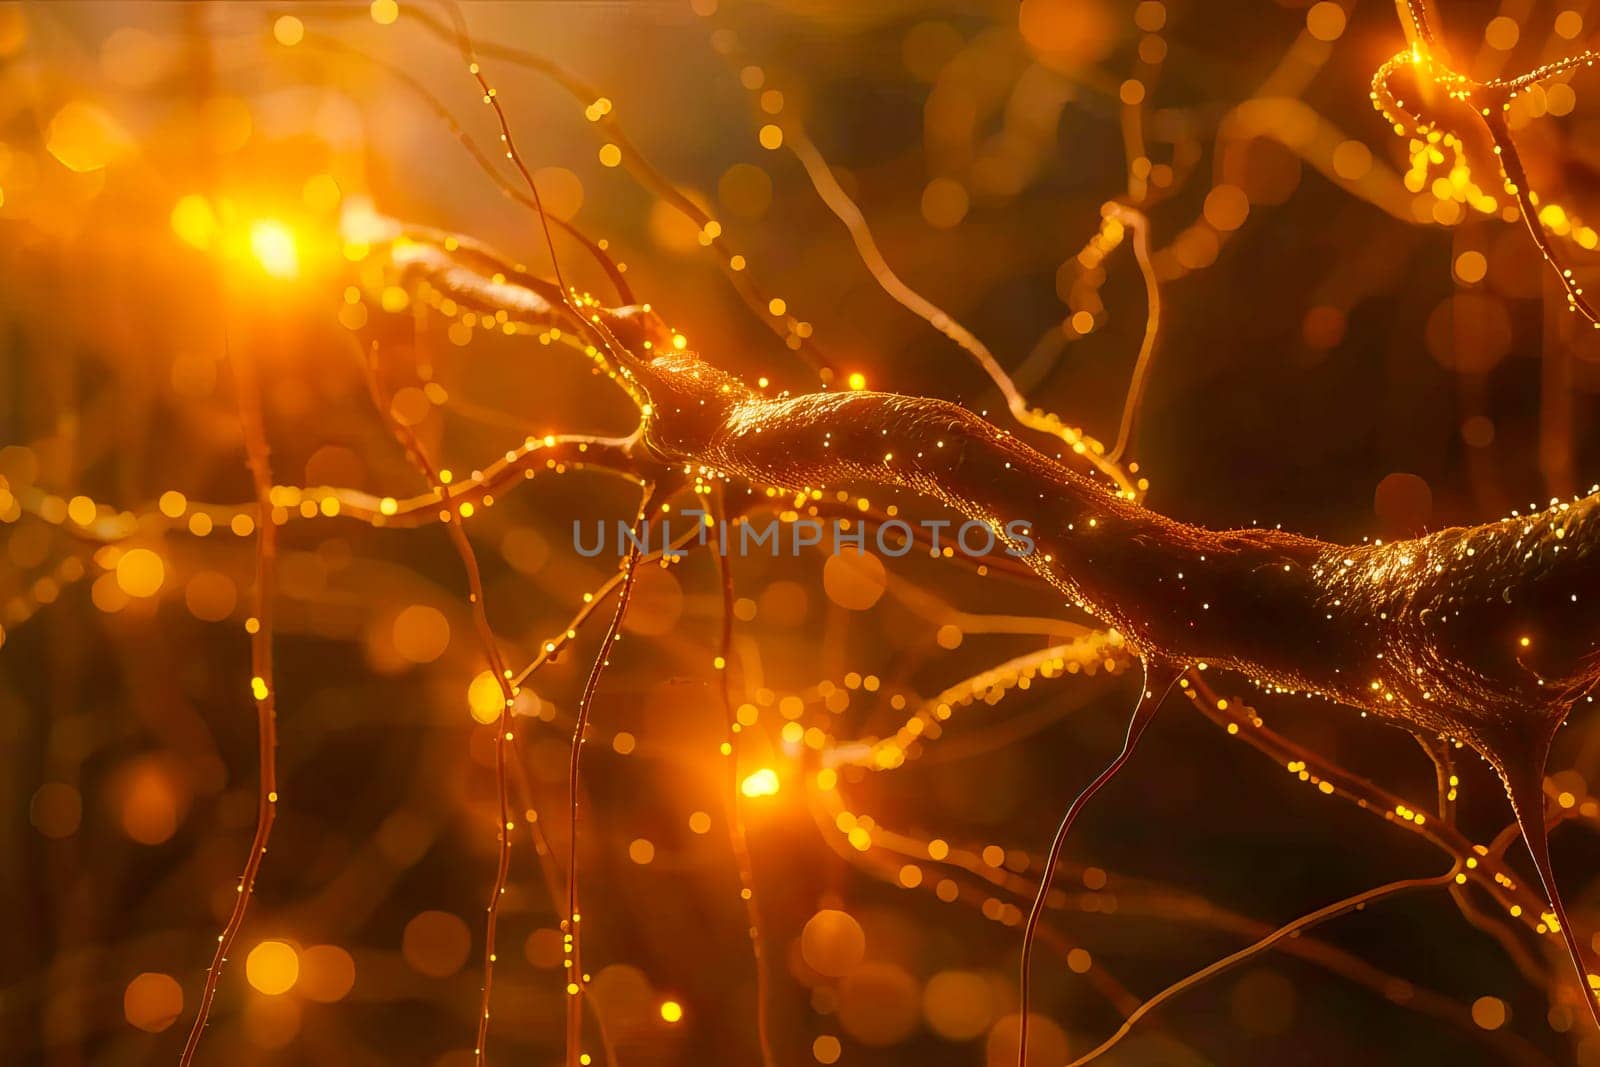 Neurons connect and fire, showcasing the complexity of brain activity.